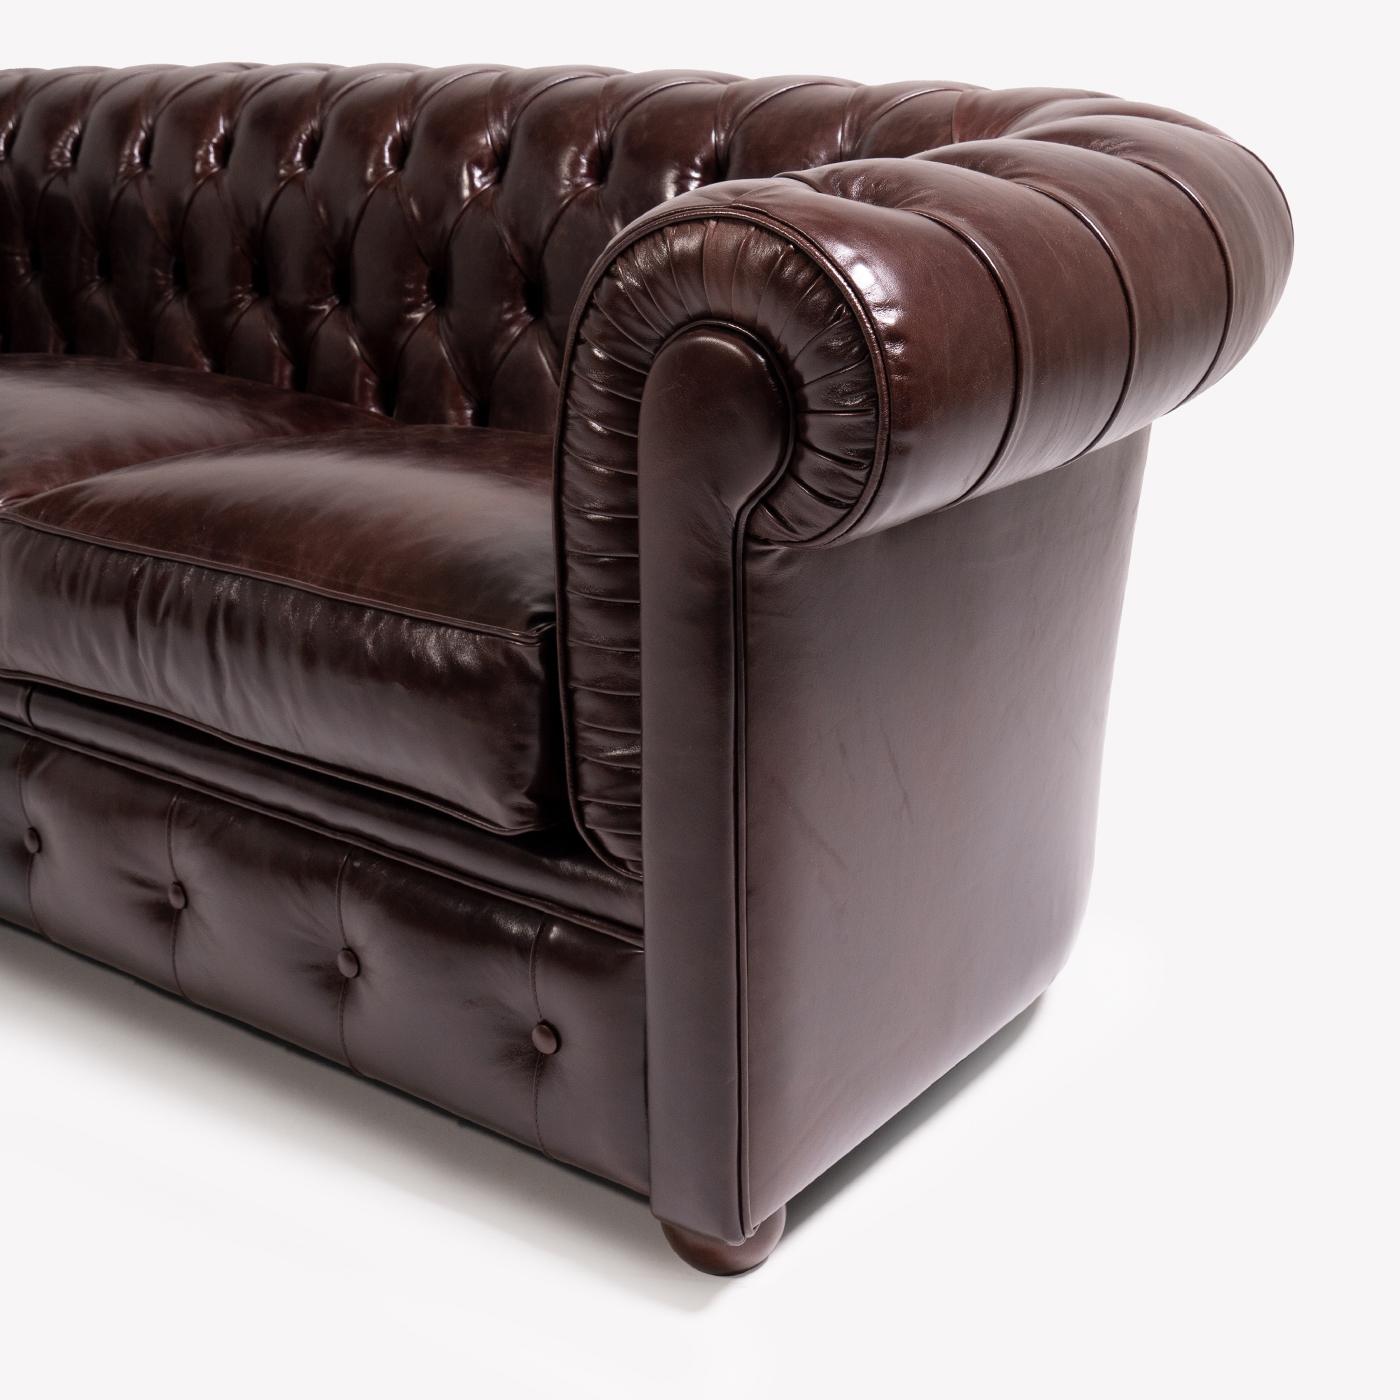 The Chesterfield sofa, from Tribeca Collection, is an icon of the world of the leather lounge, a timeless classic in the world of upholstery, an item that enriches any home and moves anyone who looks at it. For the realization of the Chesterfield